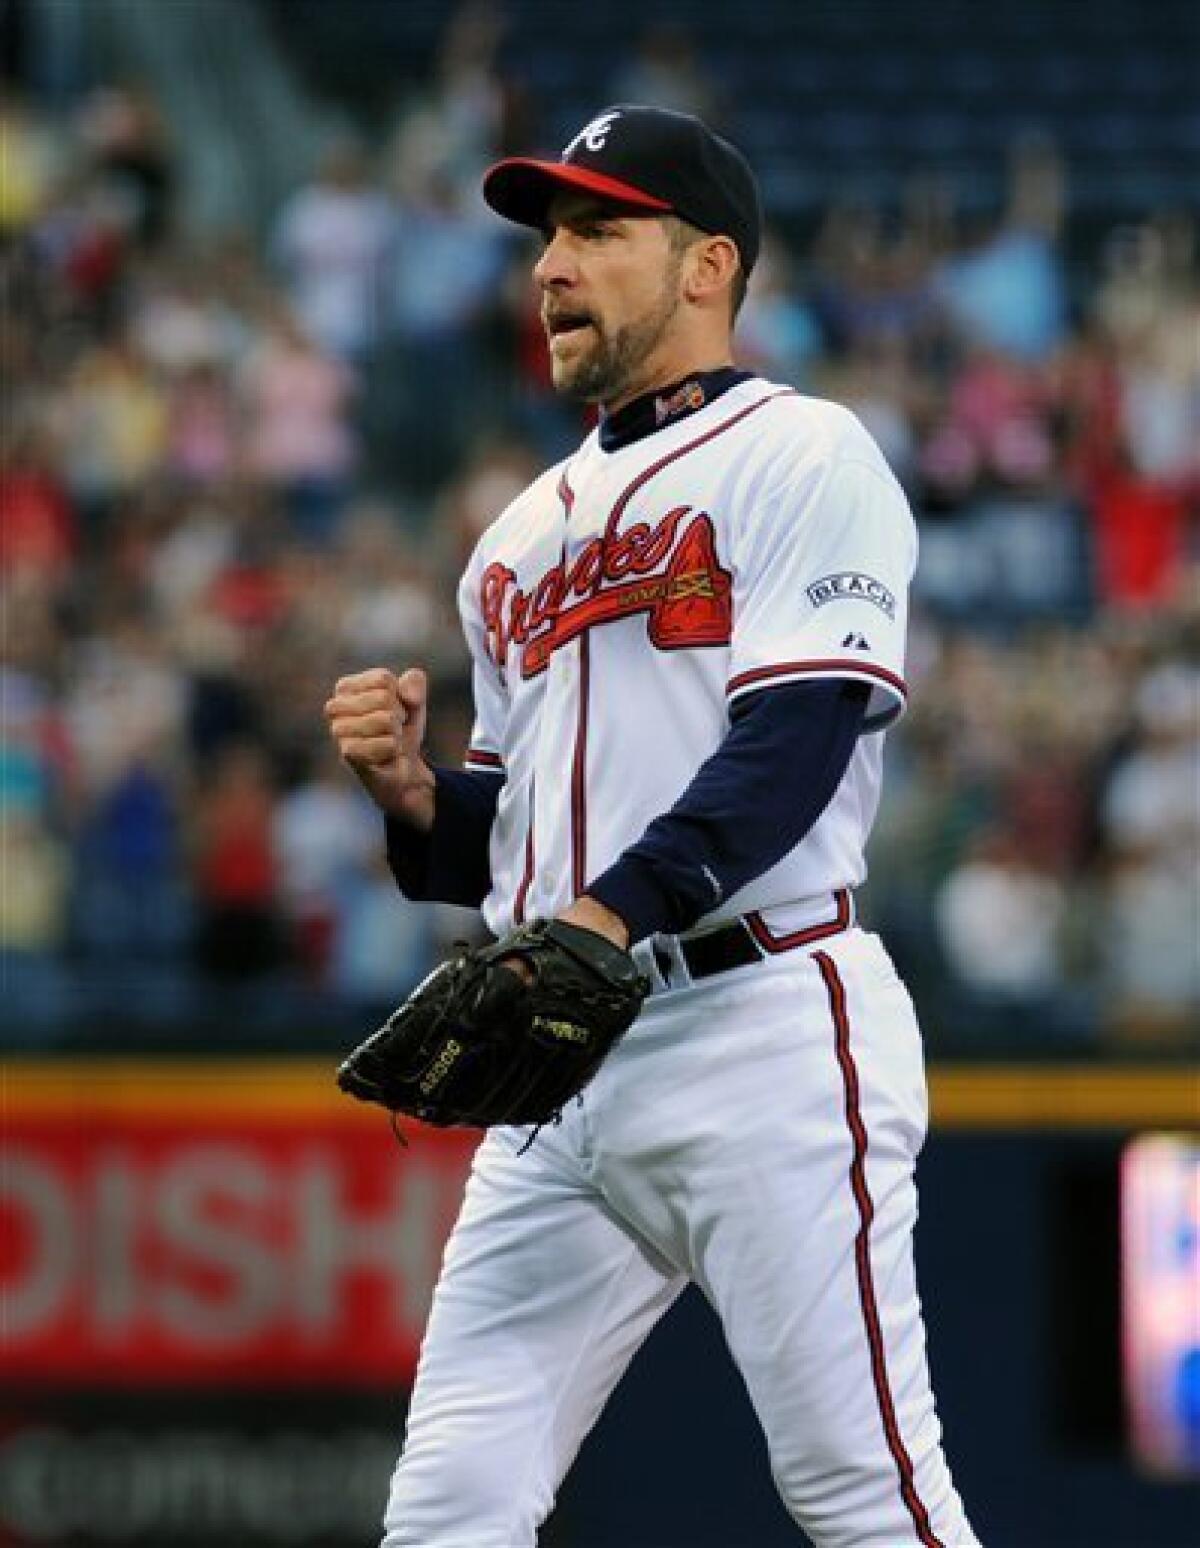 VIDEO: John Smoltz and his Christianity